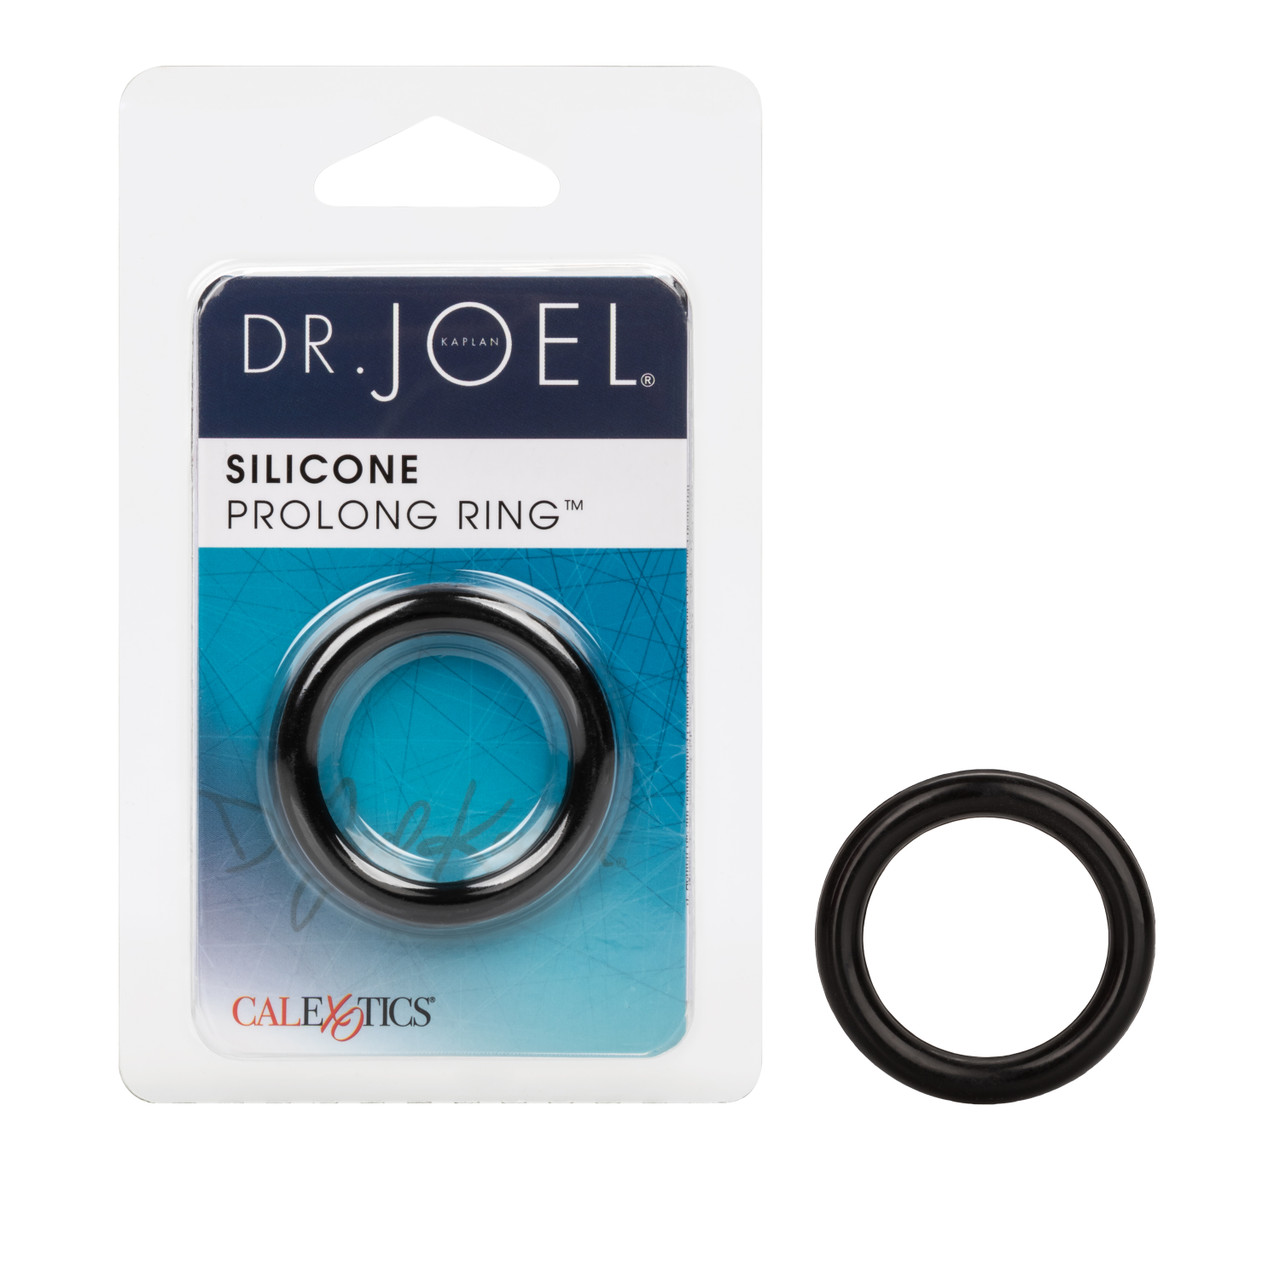 DR JOEL SILICONE PROLONG RING BLACK